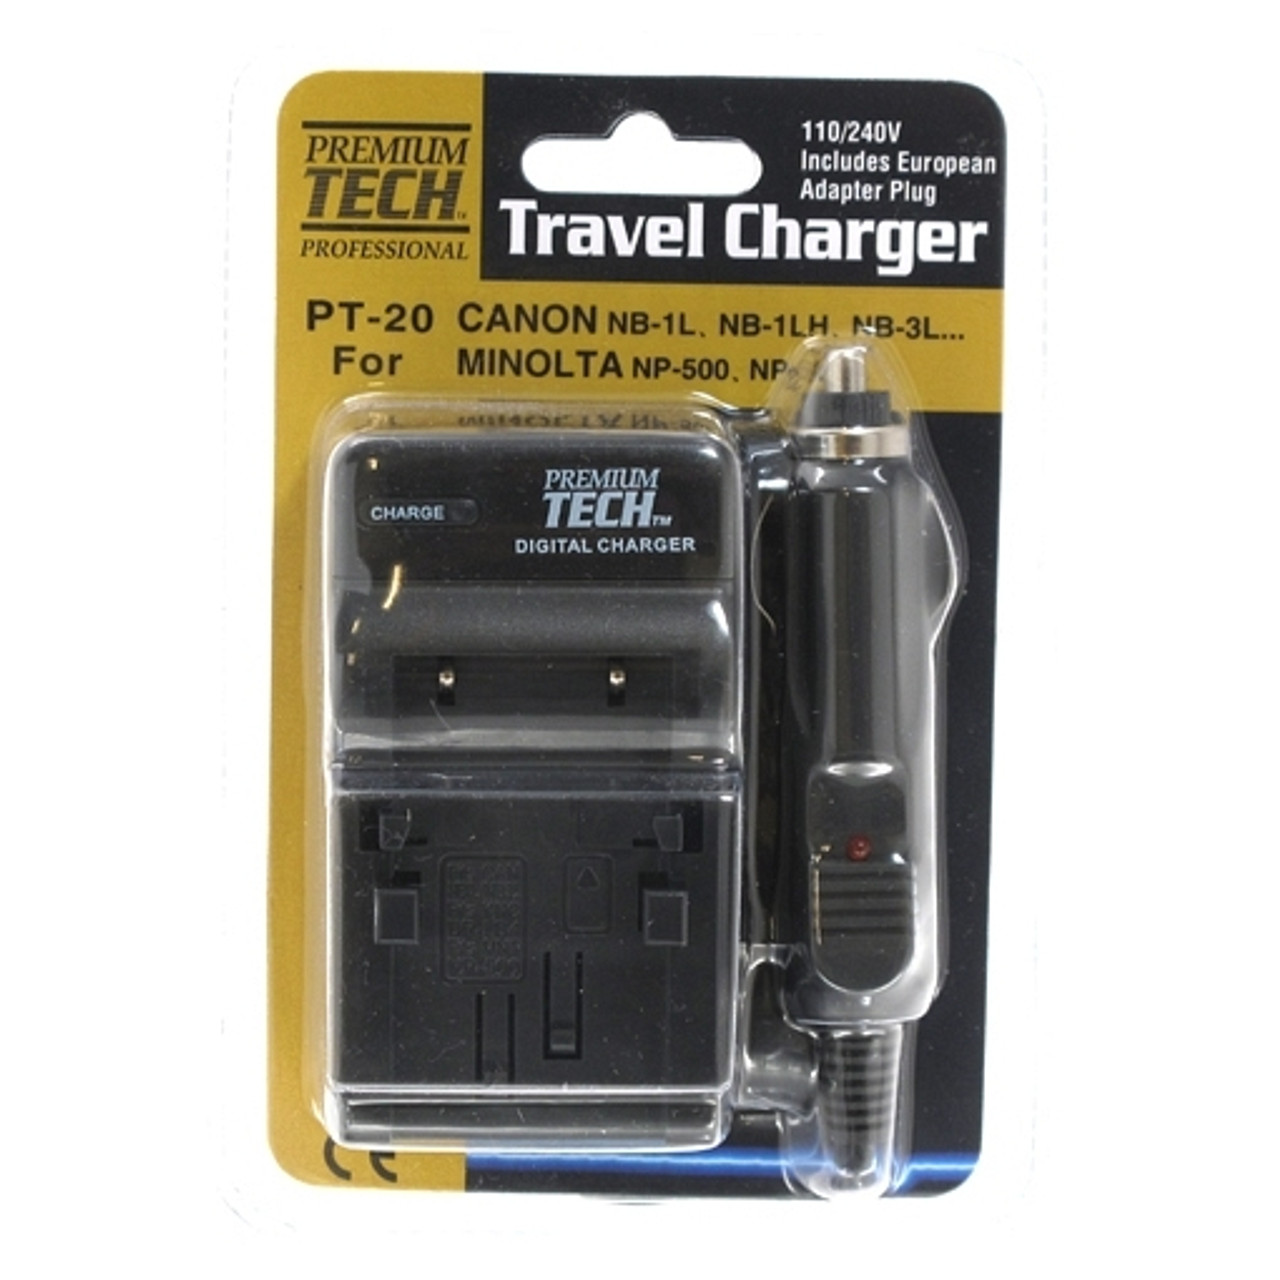 POWER2000 CANON NB-1L CHARGER (PT-20)